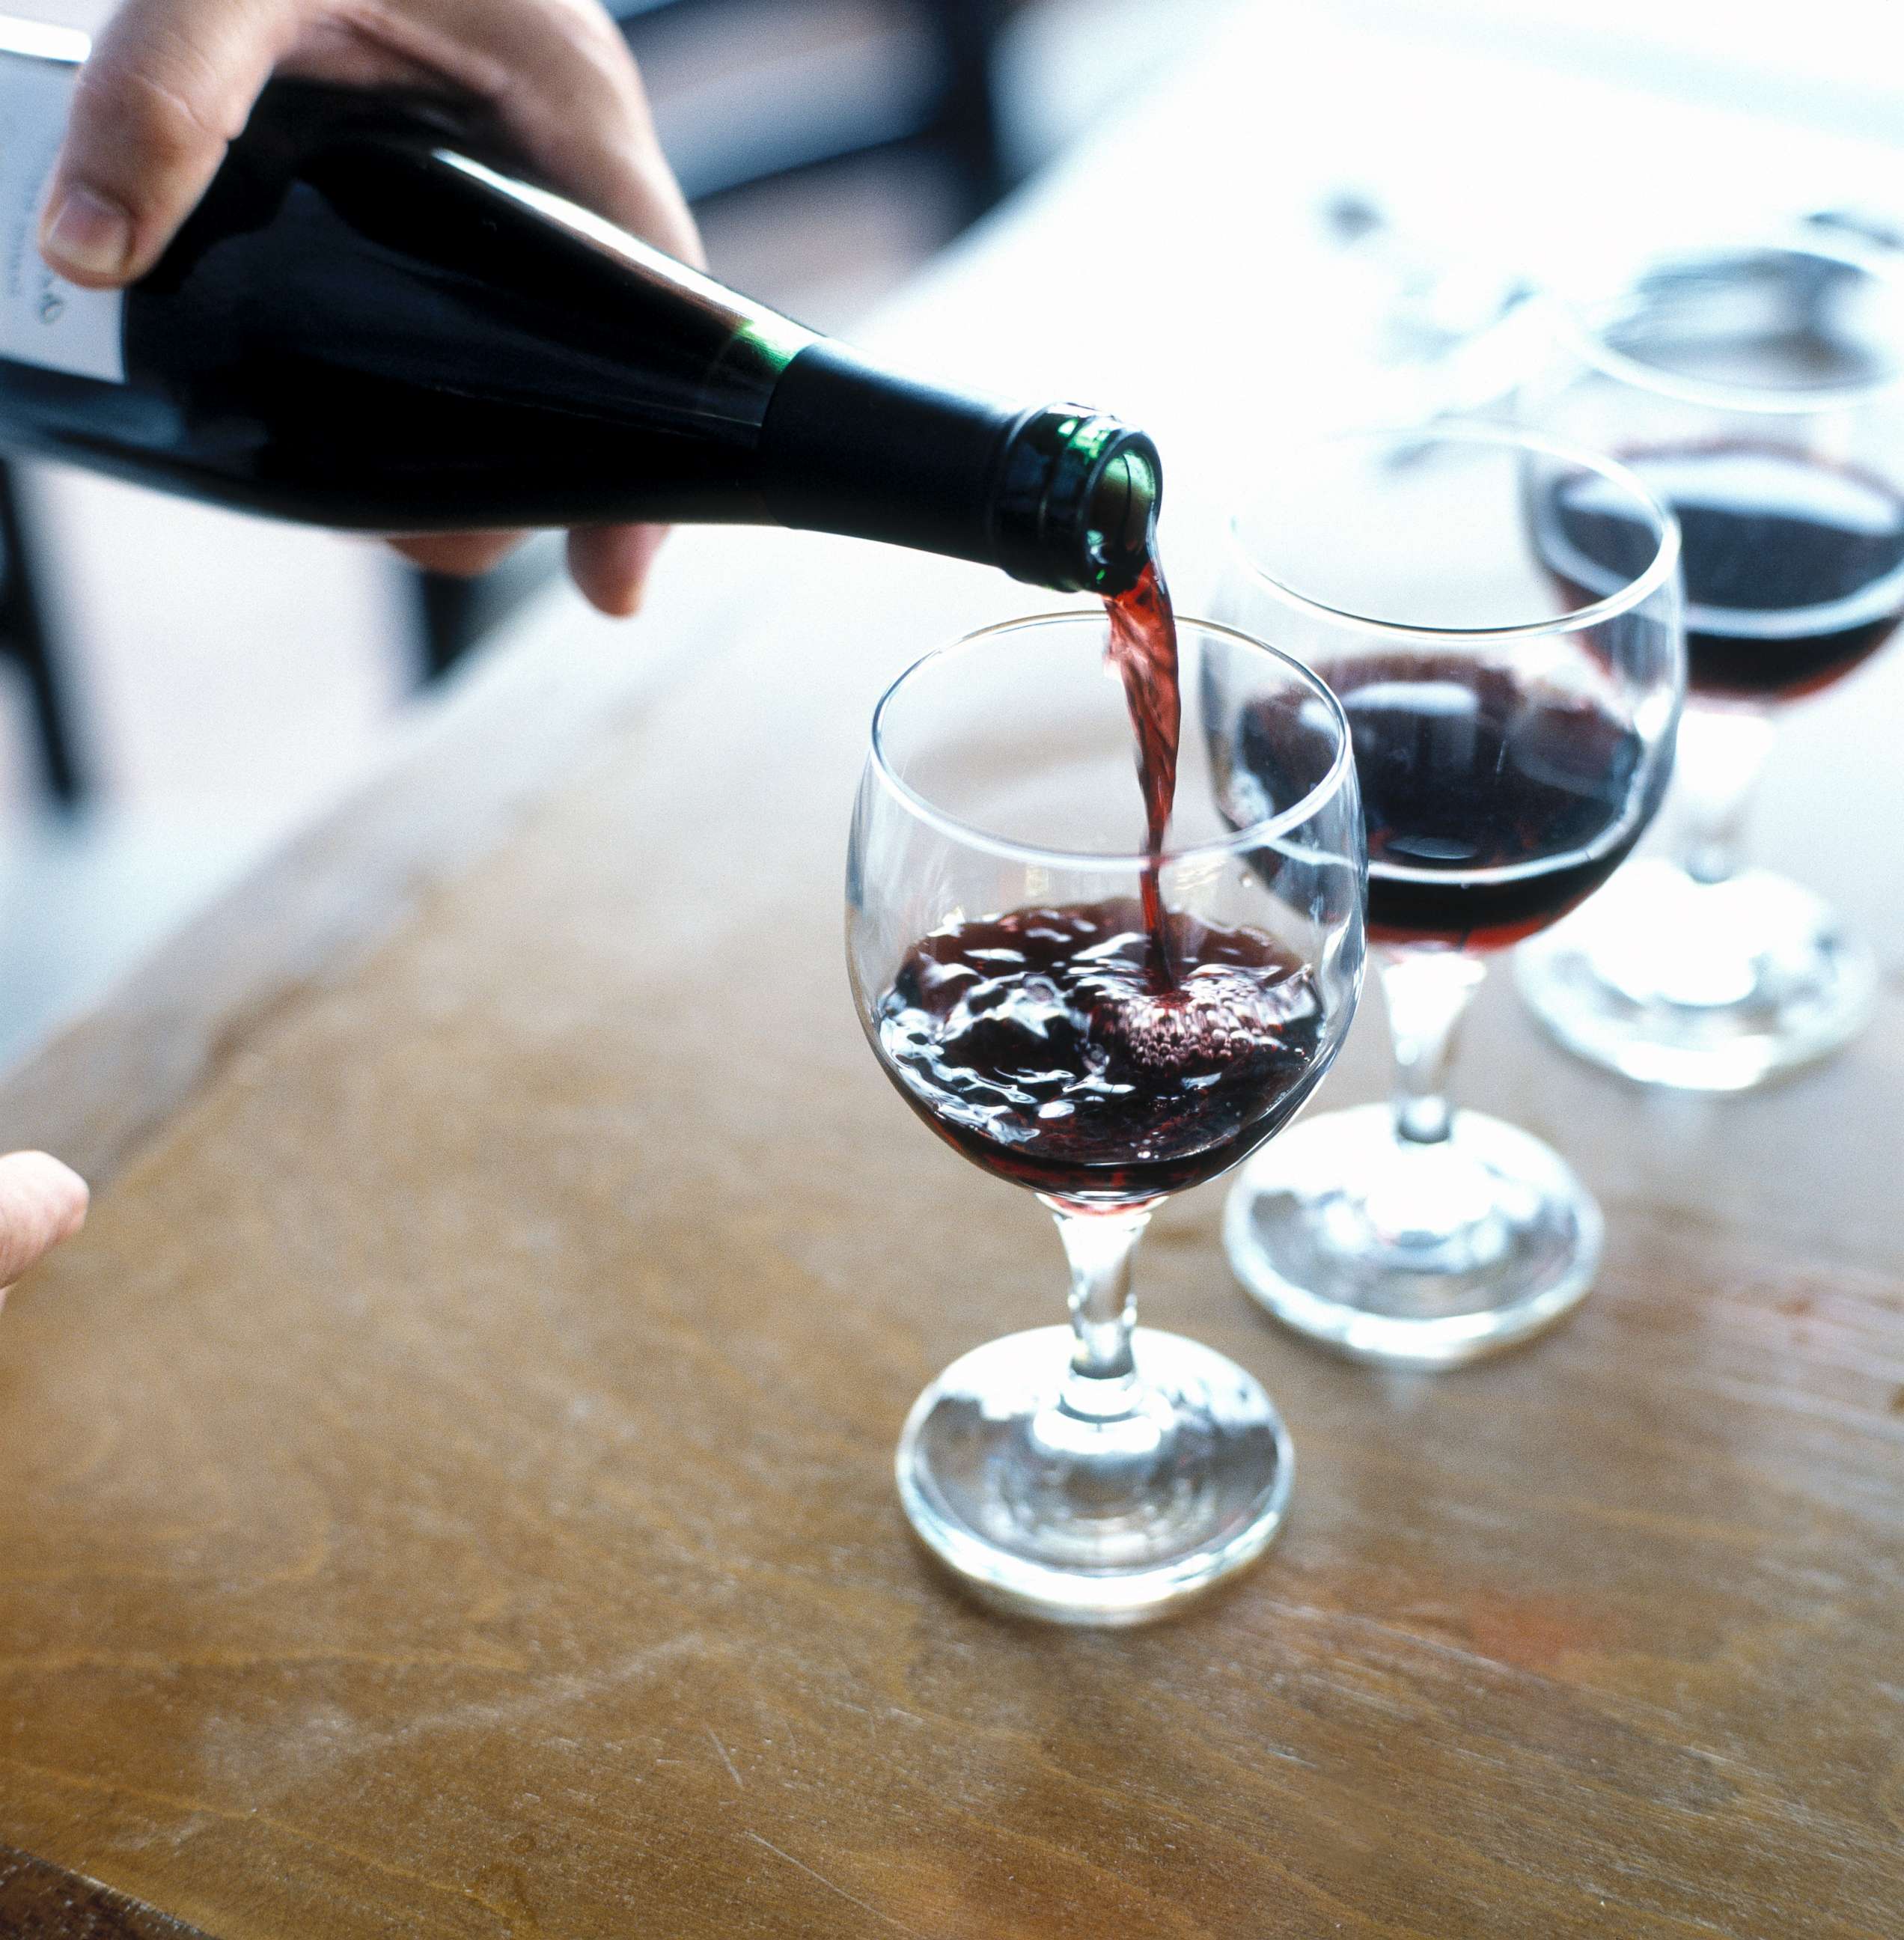 PHOTO: A person is pictured pouring red wine.